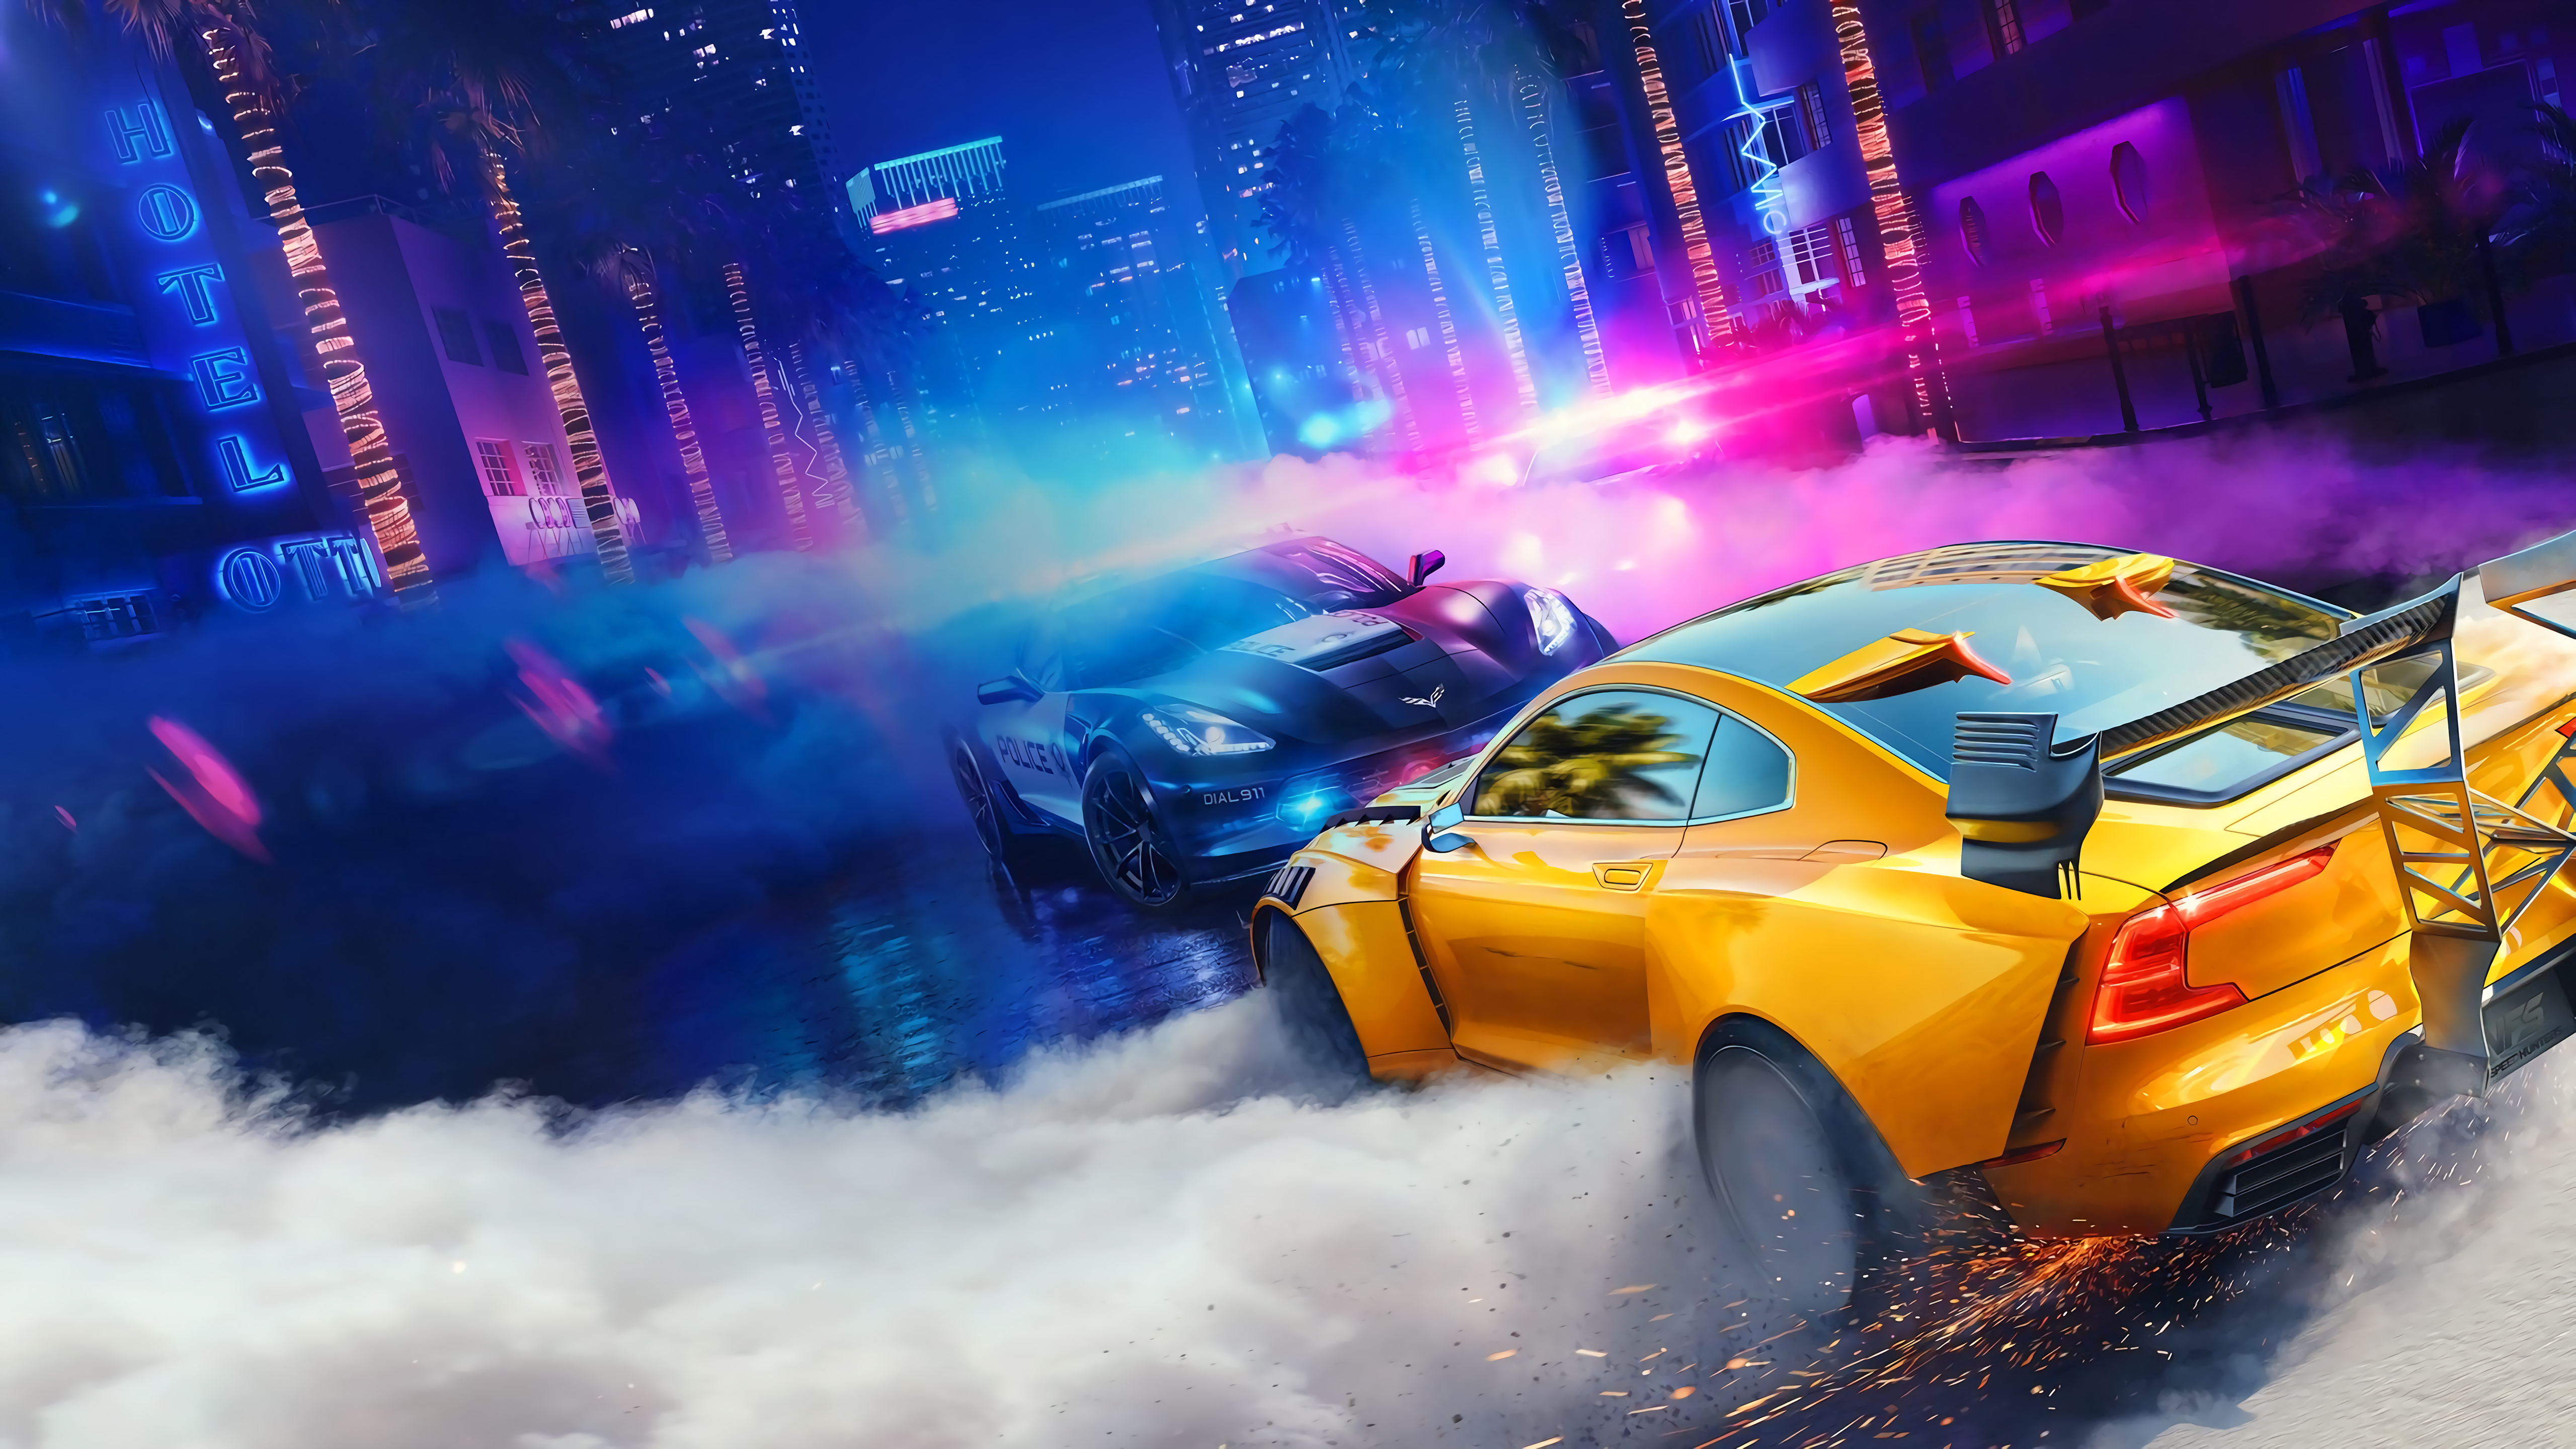 Need For Speed Carbon K Hd Games K Wallpapers Images